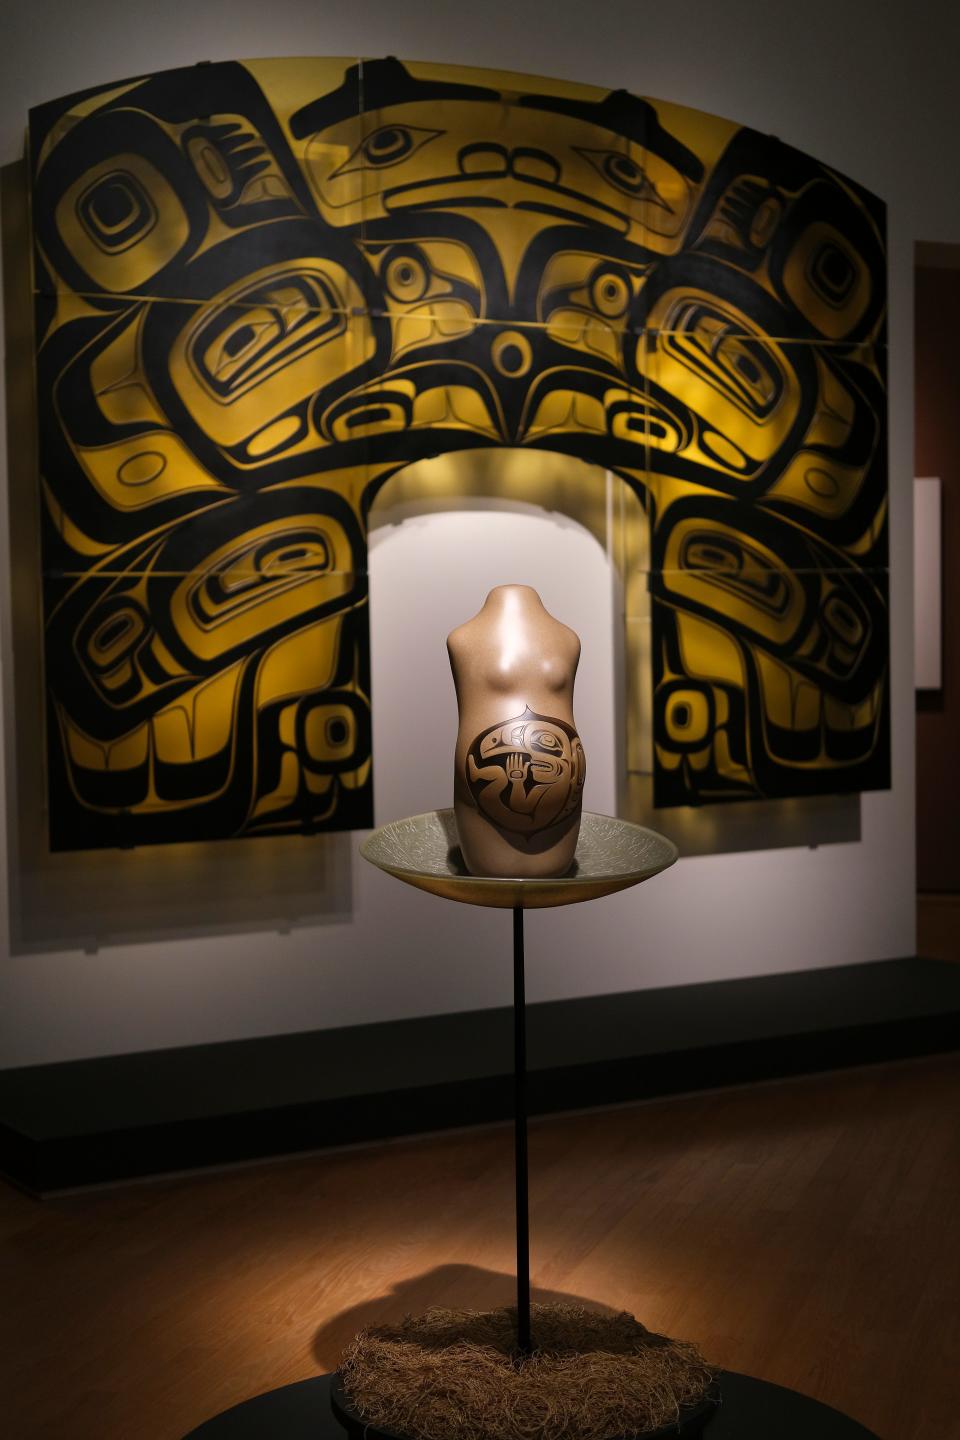 Foreground, K'anashgidel Yak Koowadzitee (Humble Birth) 2018. Oklahoma City Museum of Art exhibit, Preston Singletary: Raven and the Box of Daylight. The multi-sensory experience combines glass, video, and audio to tell the story of Raven, a creator figure in Tlingit culture. Thursday, Nov. 9, 2023